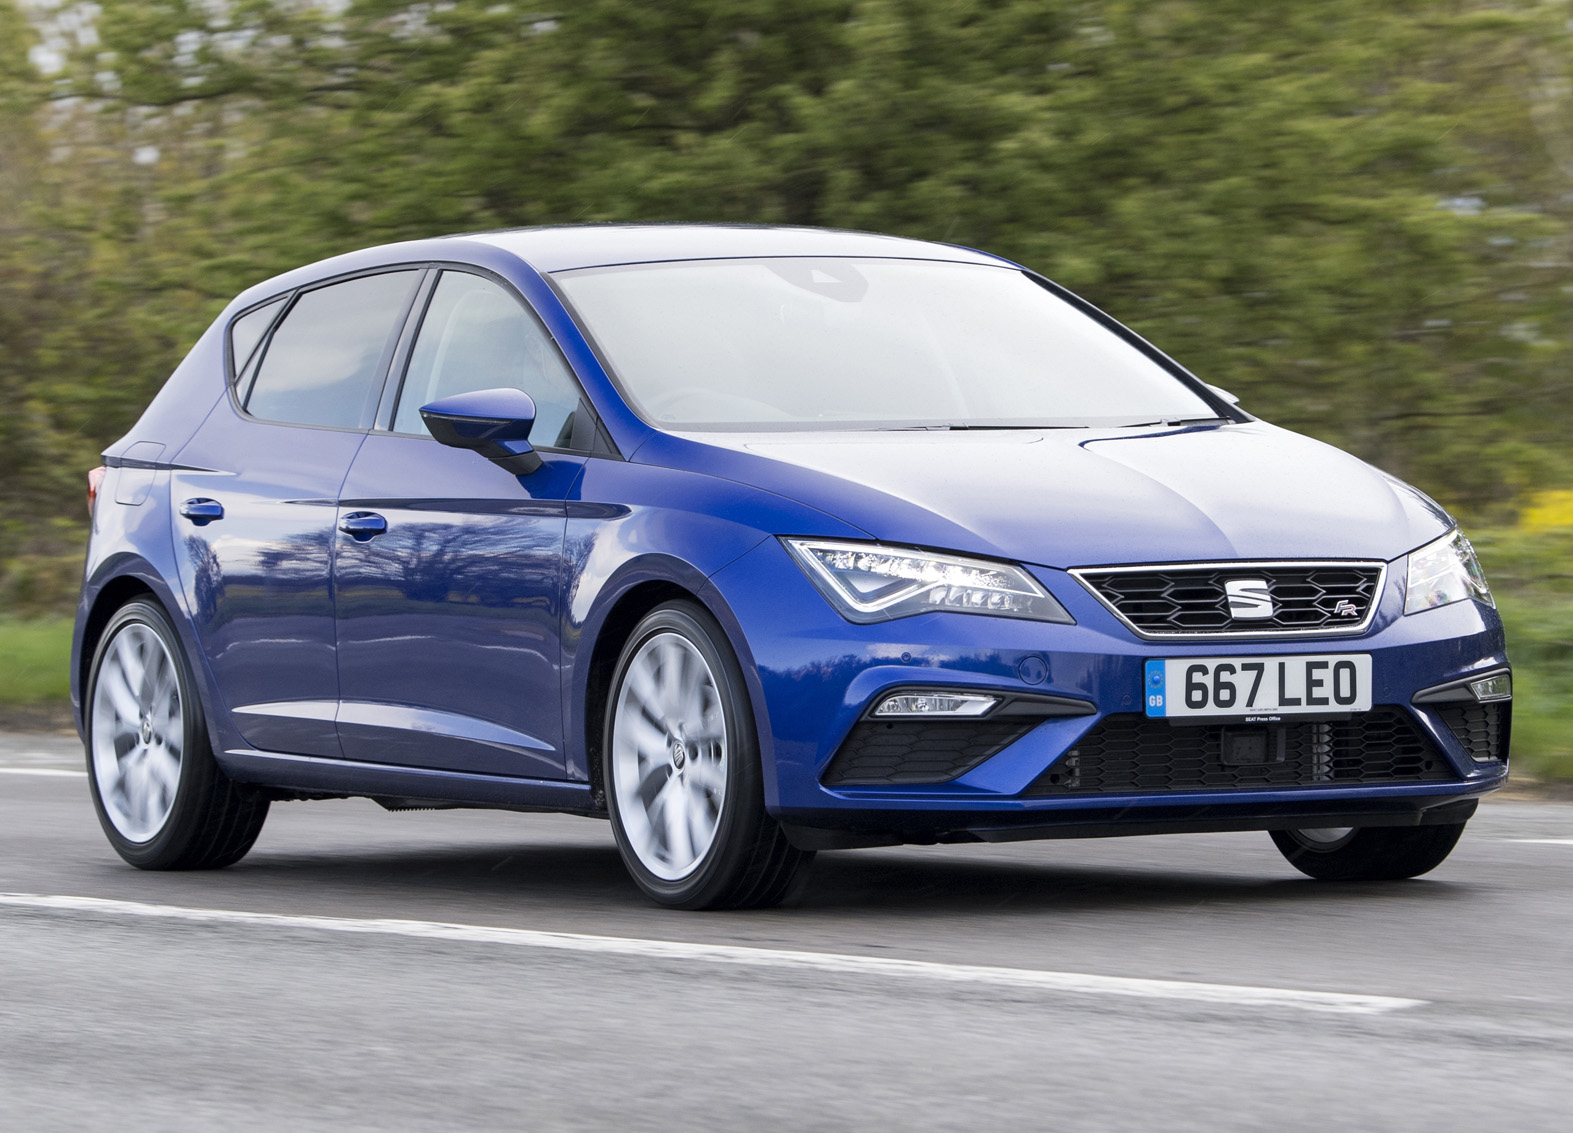 SEAT LEON 5F FR 2.0 TDI (184 Hp) 2013 ->, Seat, exhaust systems